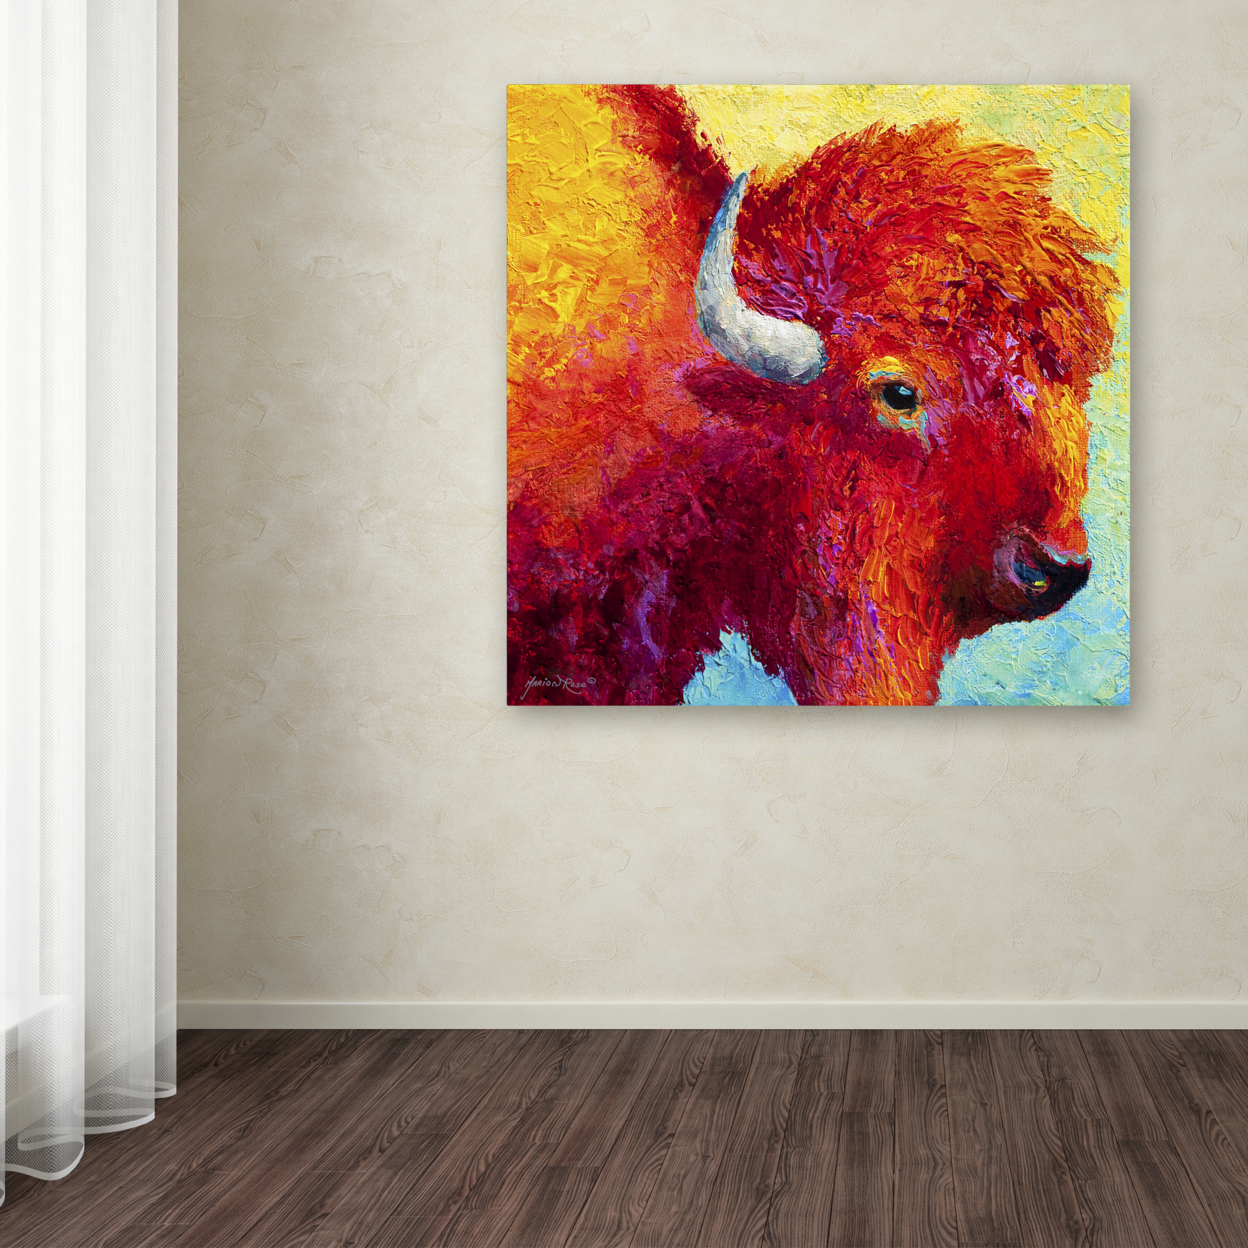 Marion Rose 'Bison Head IV' Ready To Hang Canvas Art 24 X 24 Inches Made In USA